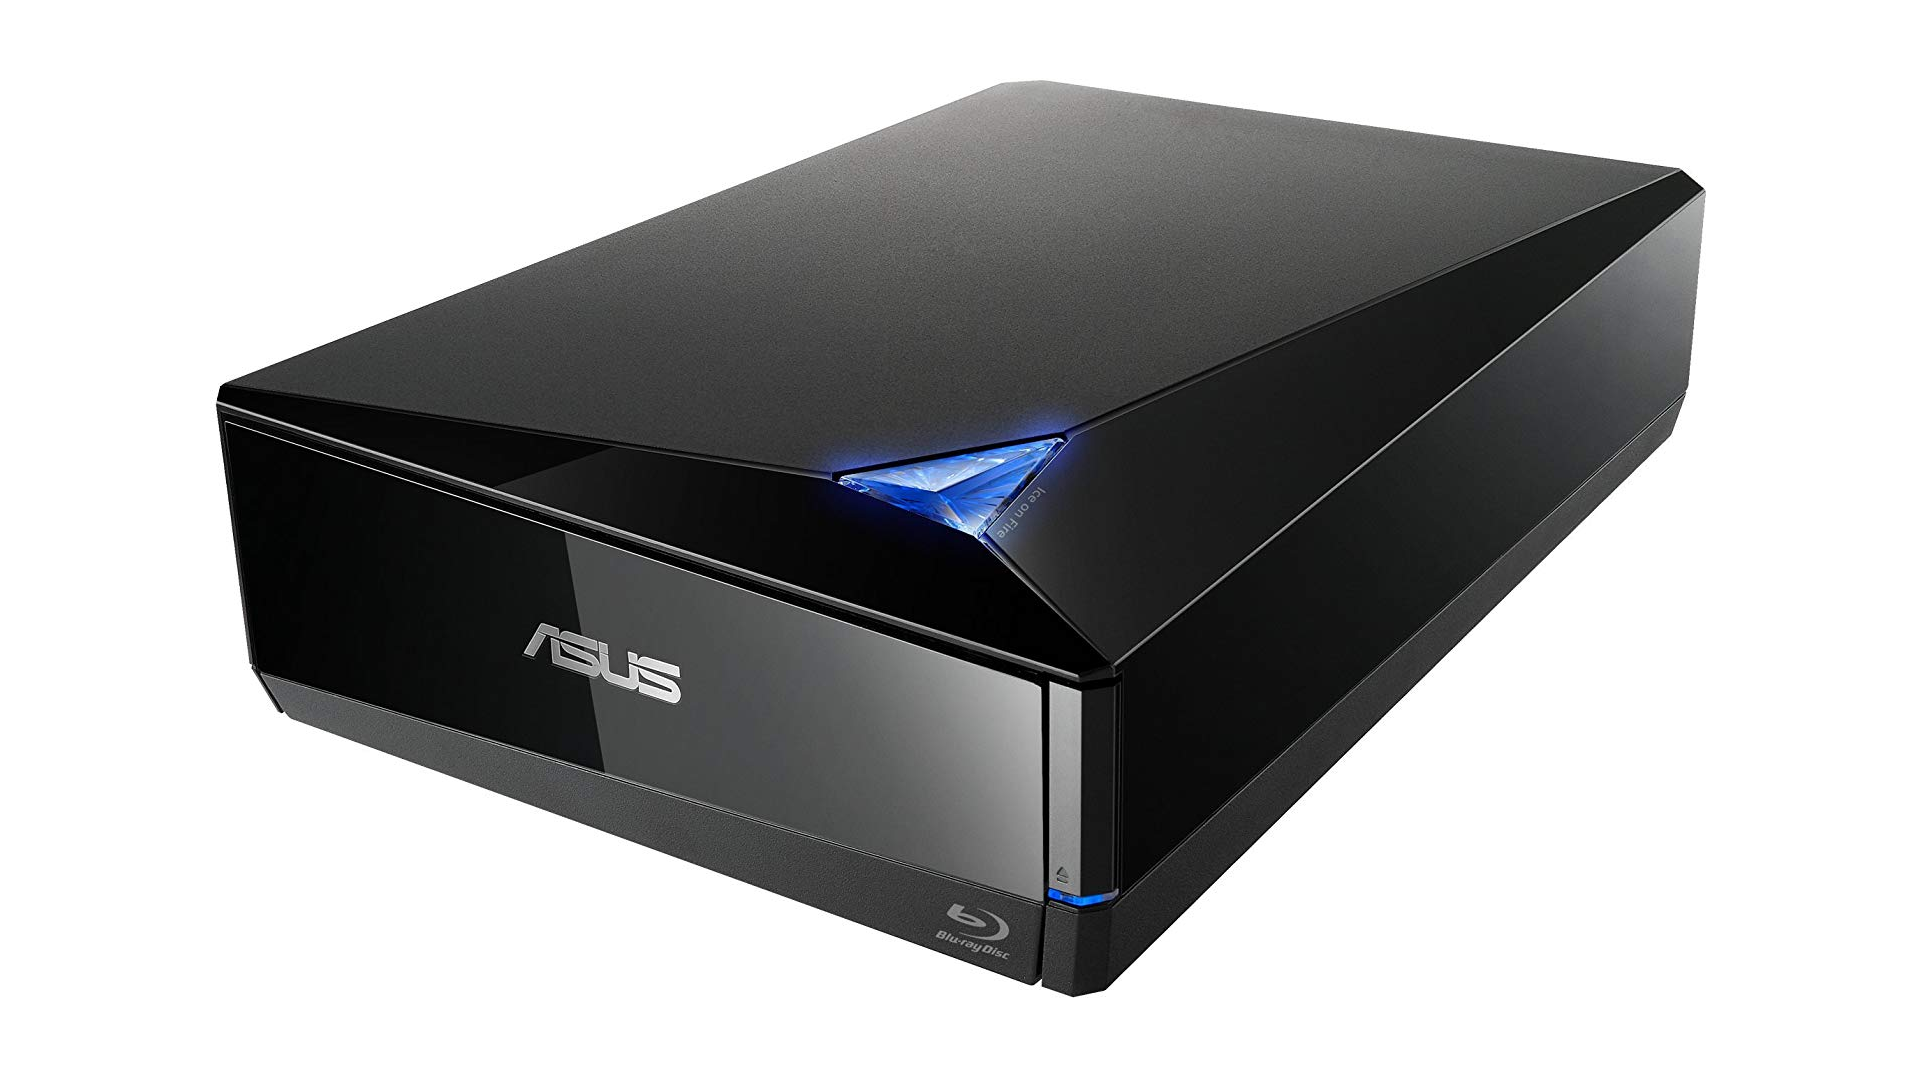 The ASUS 16X Blu-Ray drive